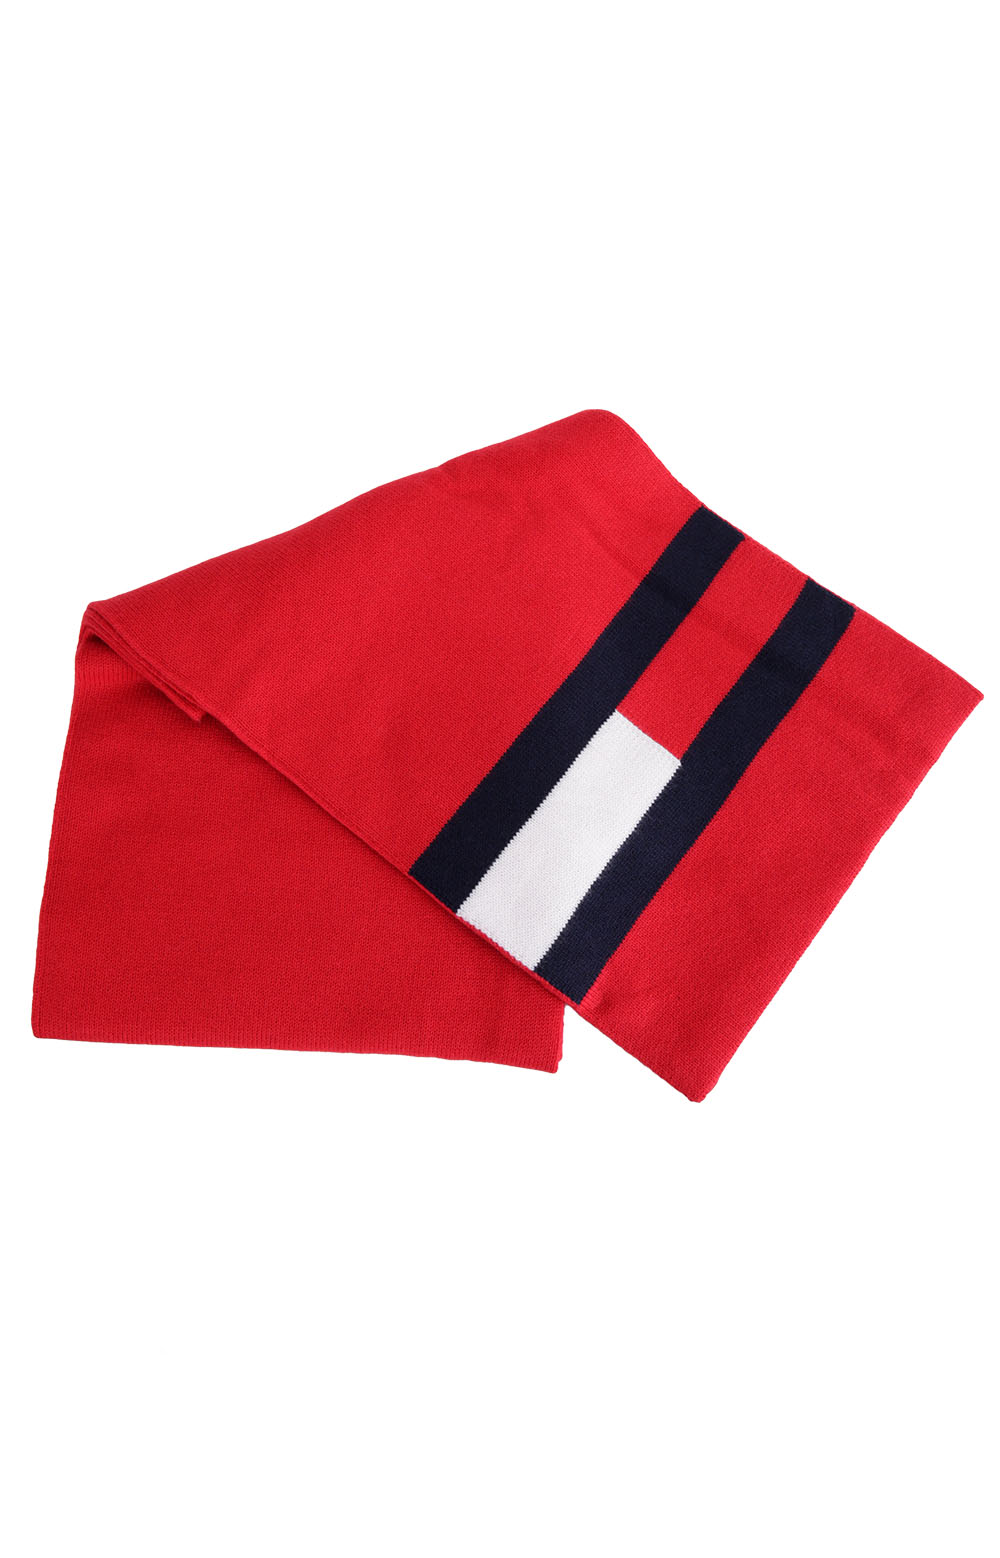 AM Dino Gifting Scarf - Red